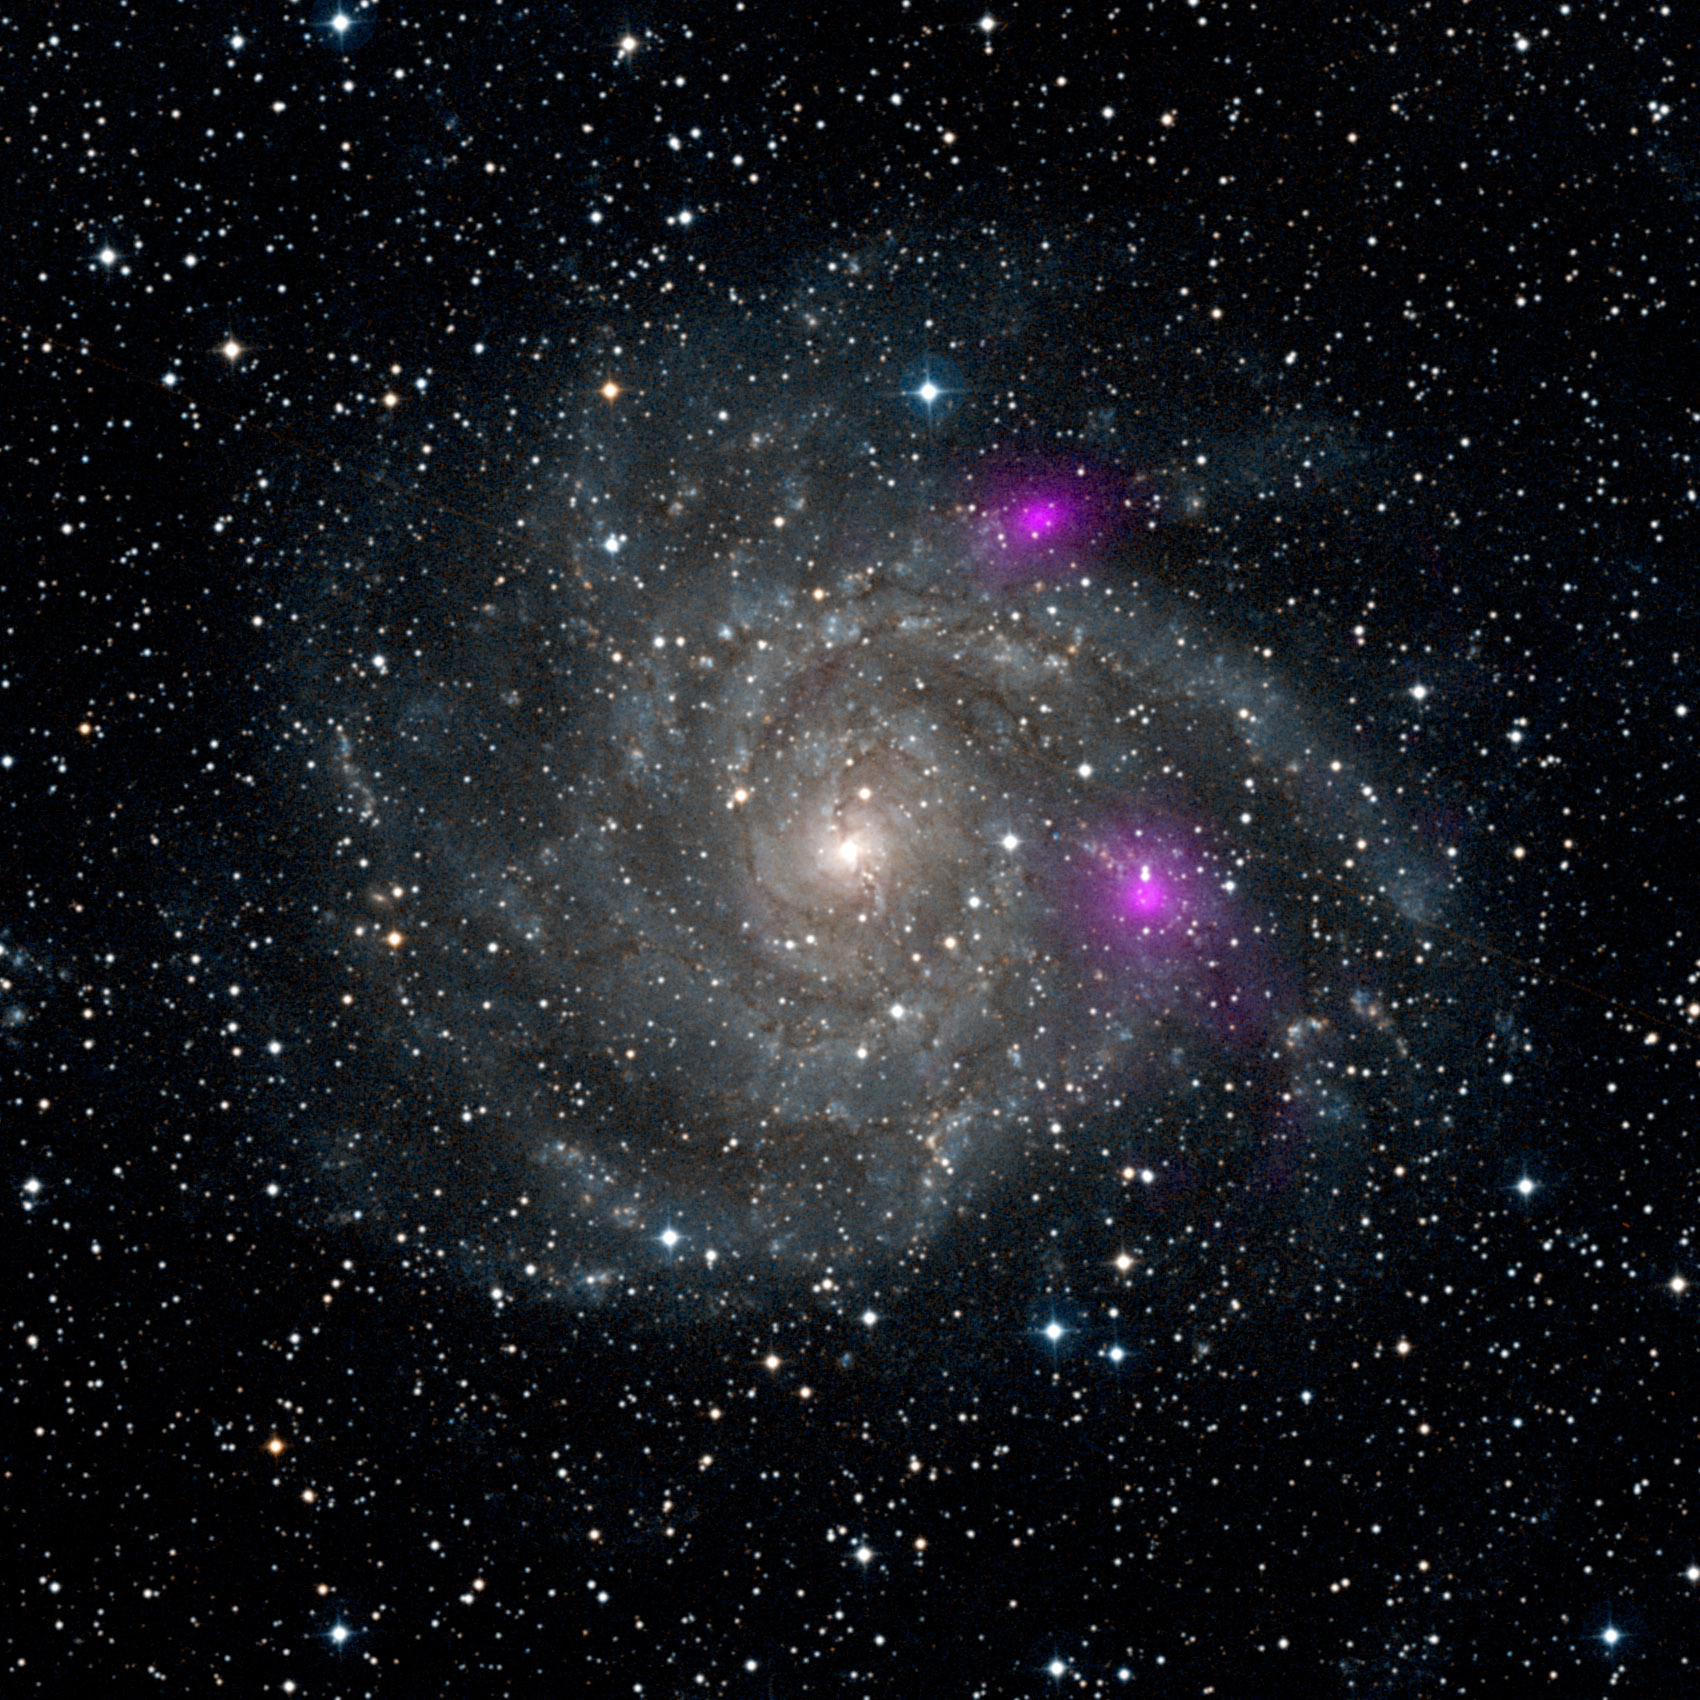 NASA’s Nuclear Spectroscopic Telescope Array, or NuSTAR, caught the glow of two black holes lurking inside spiral galaxy IC342